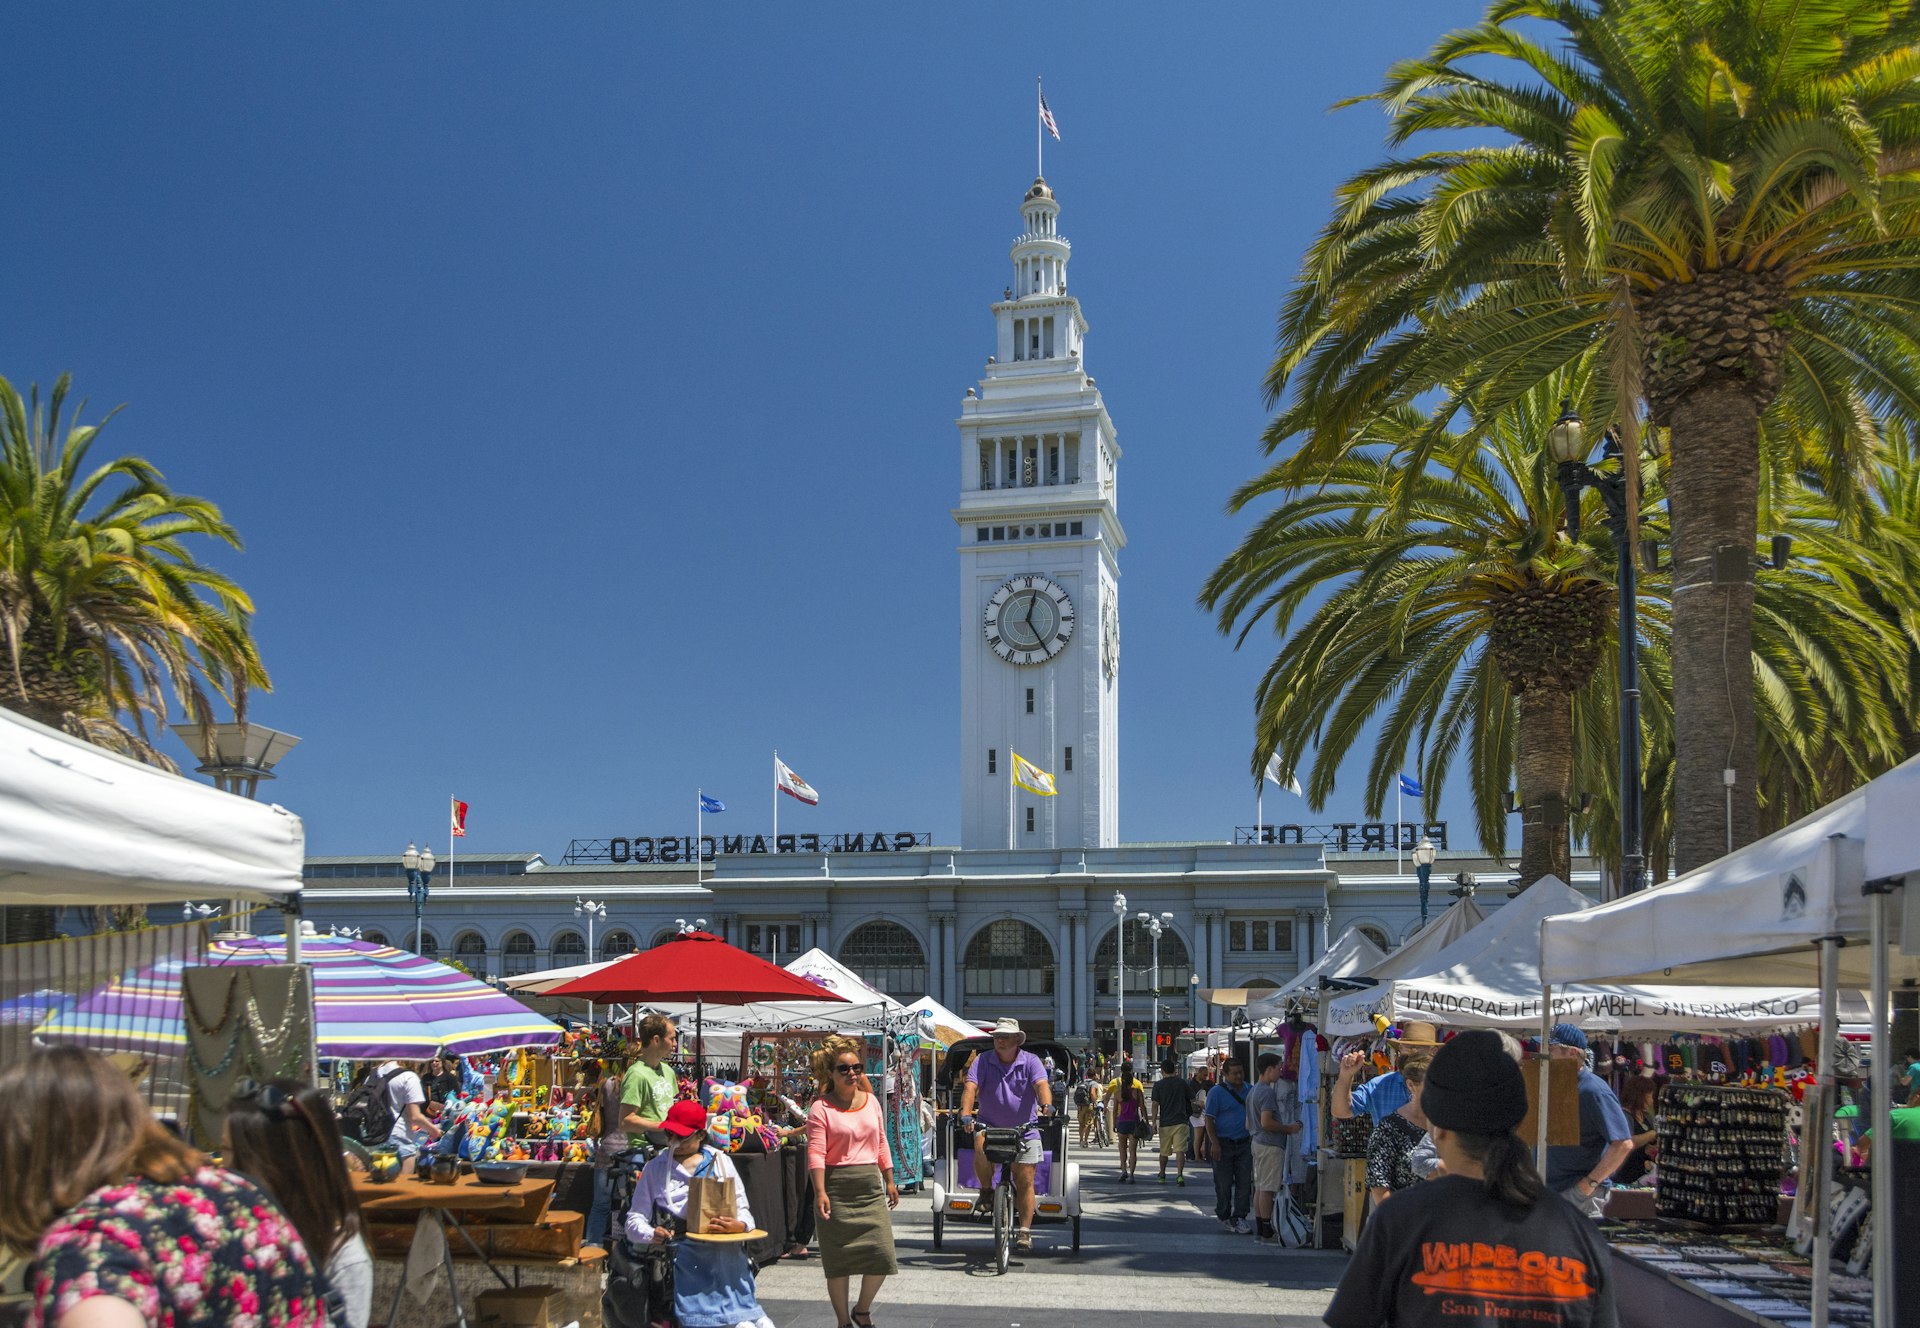 The farmers' market outside the Ferry Building in San Francisco